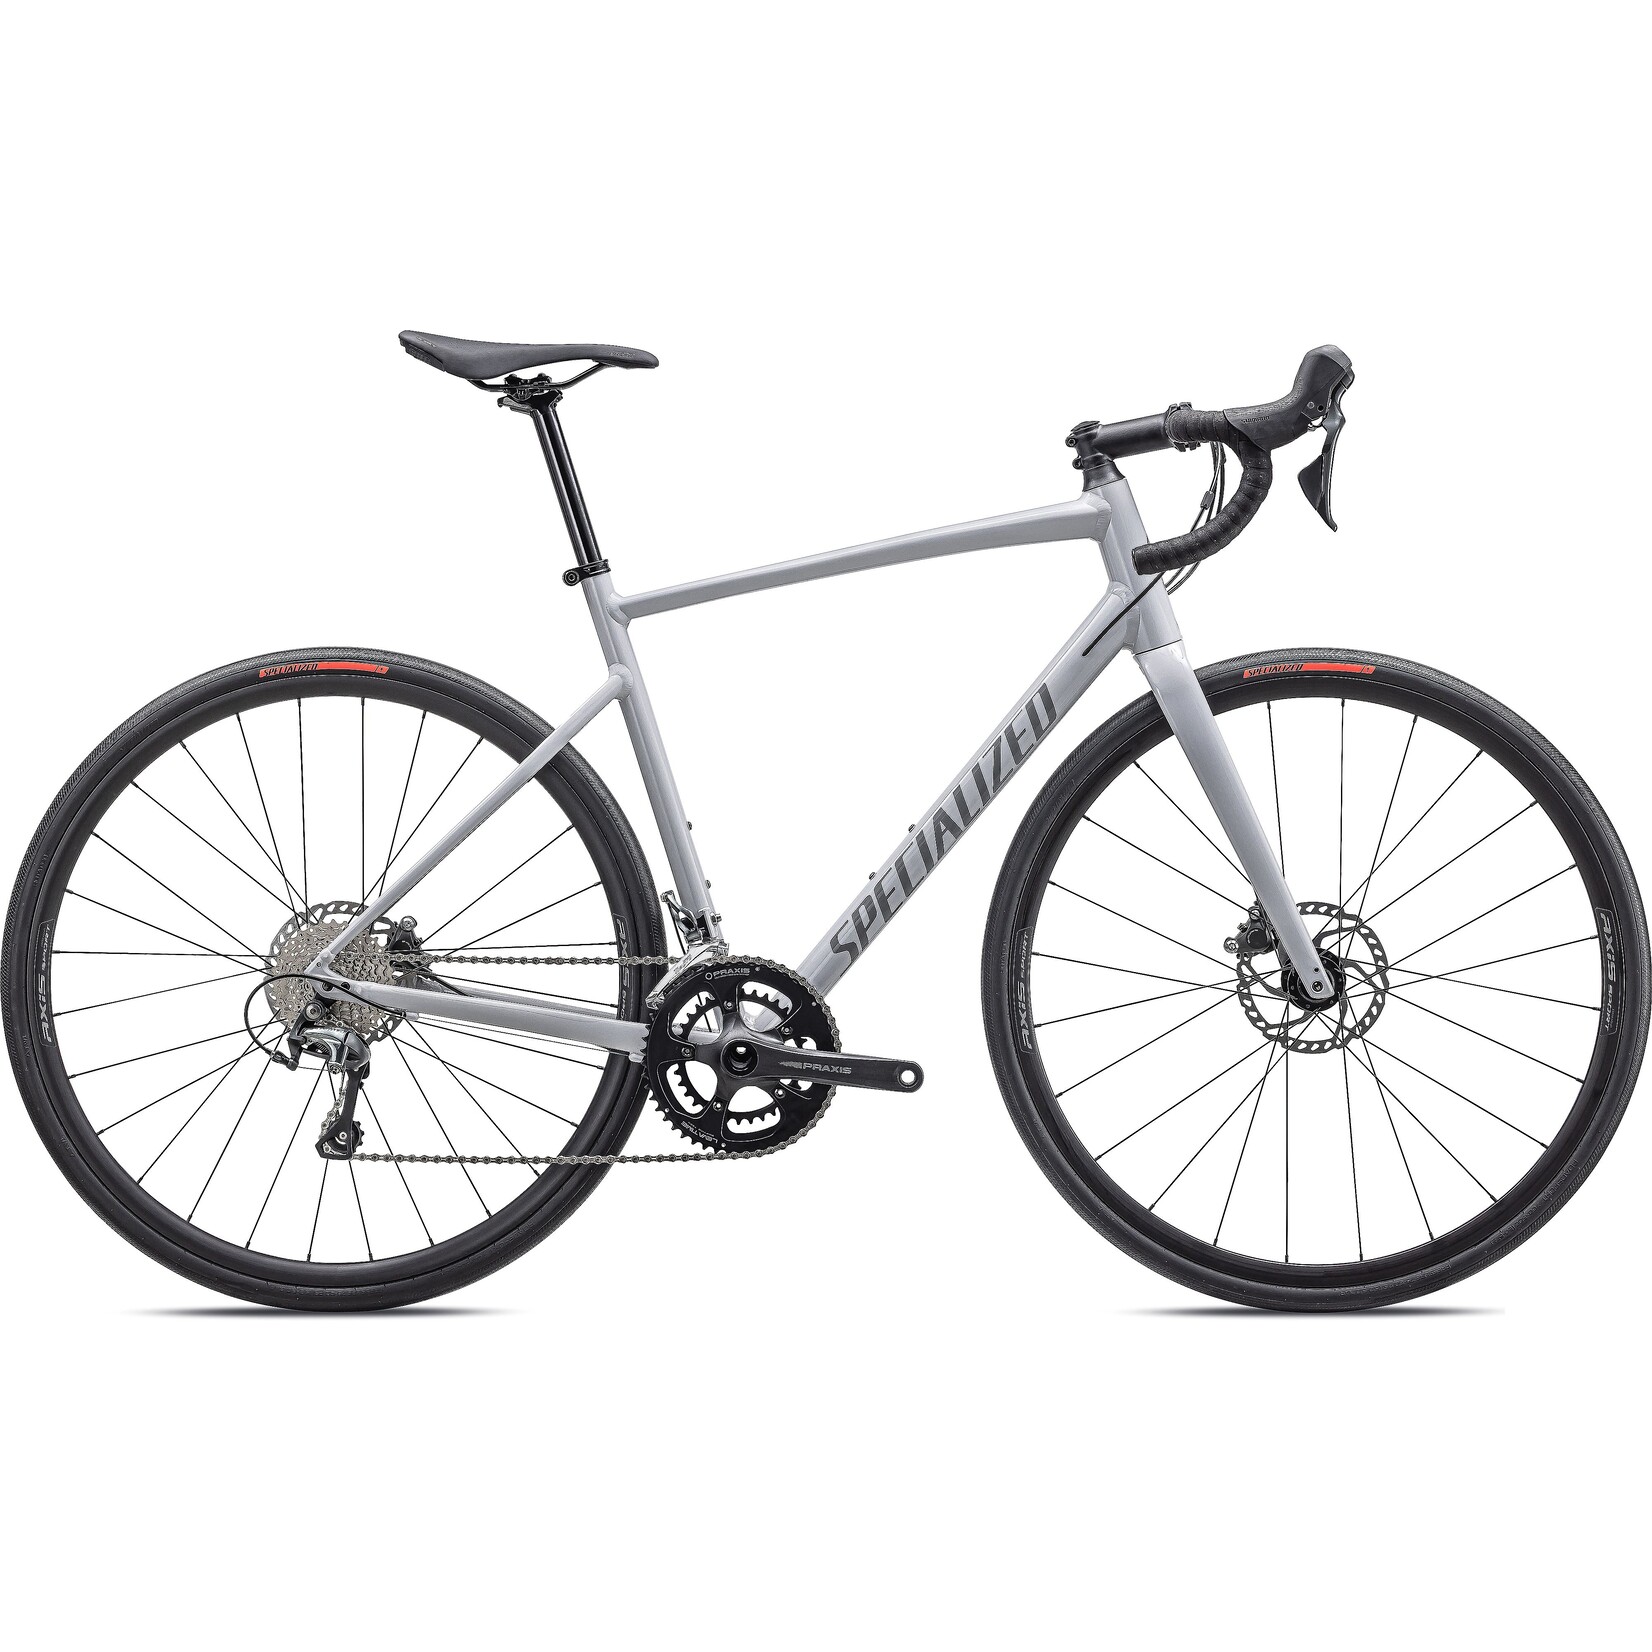 Specialized Allez Sport in Gloss Dove Grey/Cool Grey/Chameleon Lapis